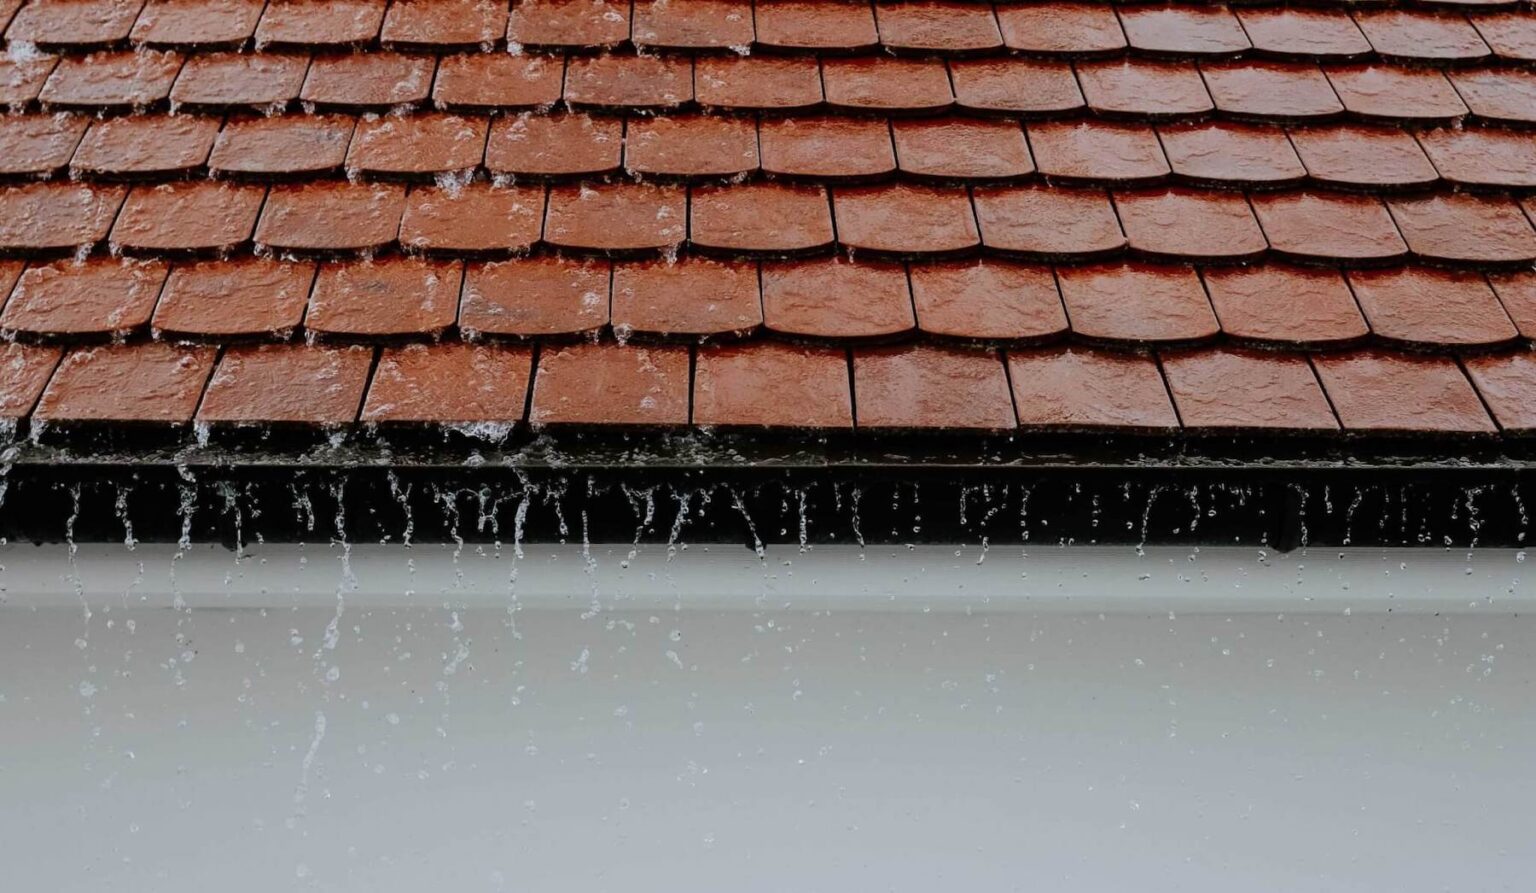 Pooling water is a problem with flat roofing since they can't drain water. It's your responsibility to take the necessary steps to prevent water pooling.